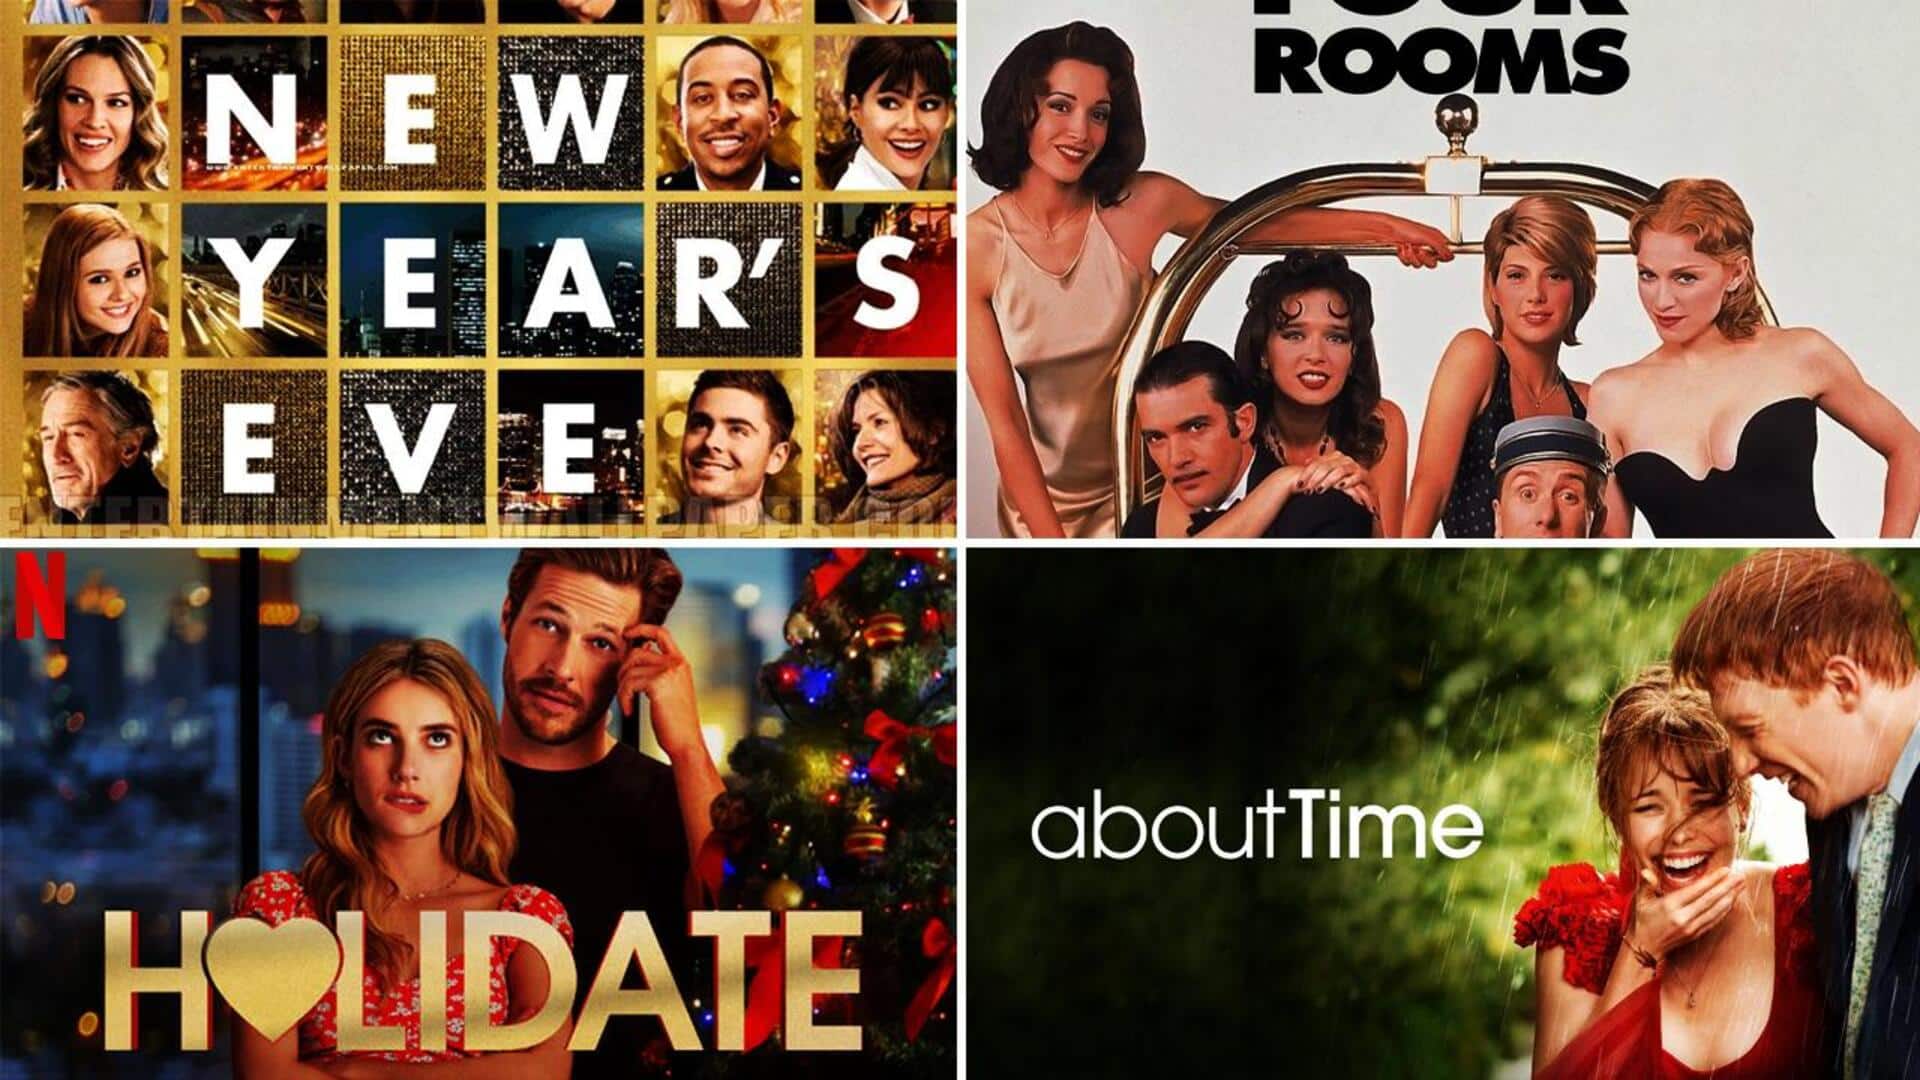 'Four Rooms' to 'Holidate': Hollywood movies ft. New Year's Eve